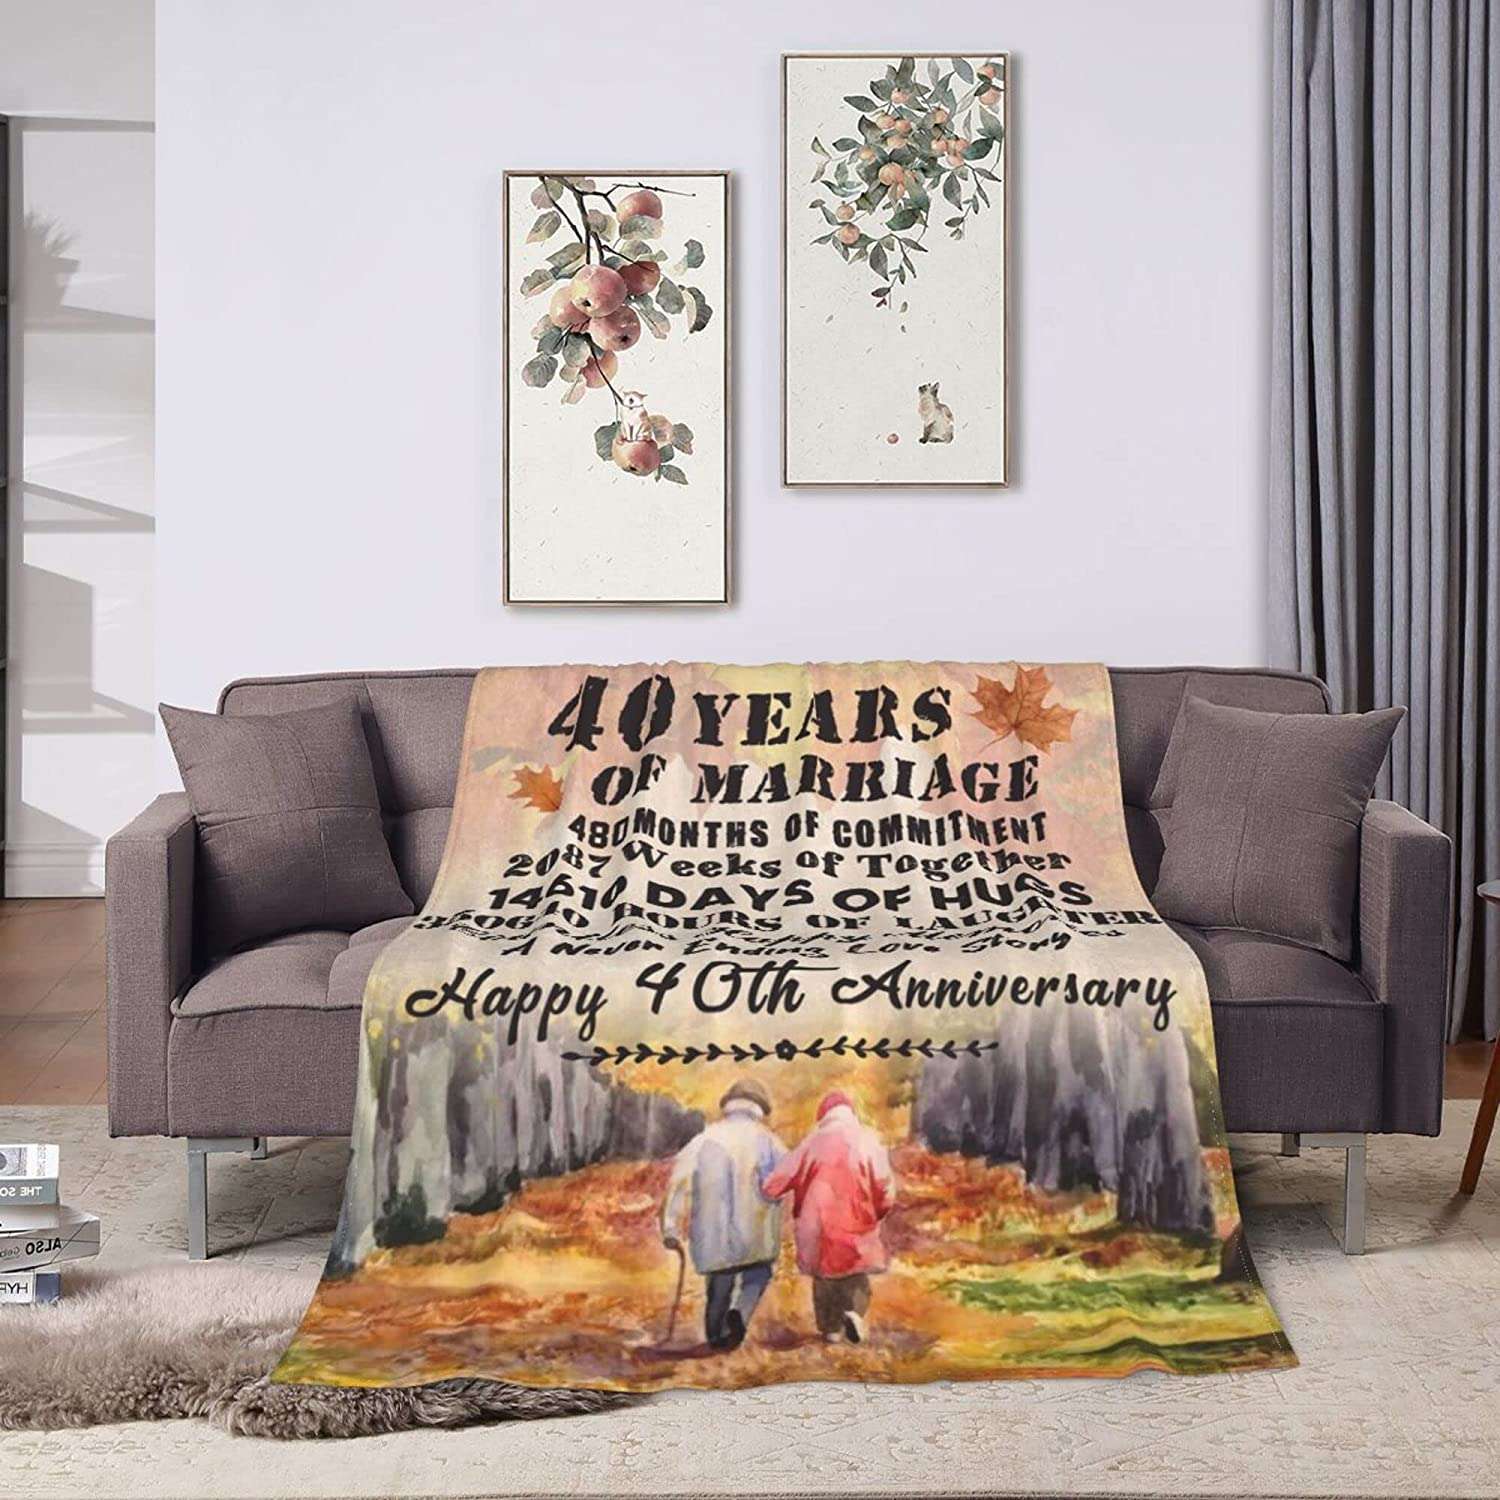 Gift for 40th Wedding Anniversary Blanket, Together And Hugs Couple Blanket